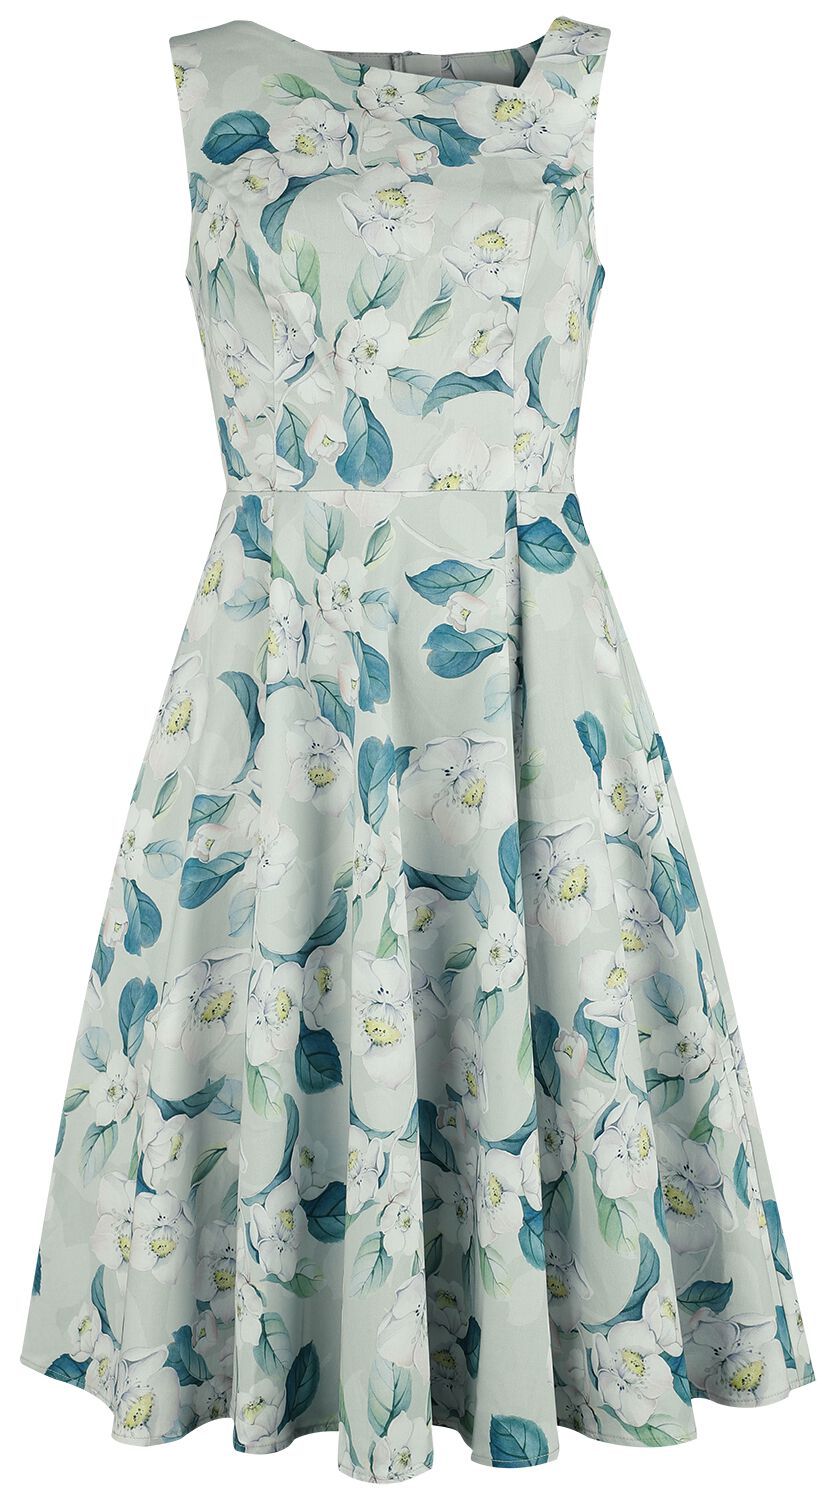 Image of Abito media lunghezza Rockabilly di H&R London - Rey Floral Swing Dress - XS a 4XL - Donna - verde/bianco